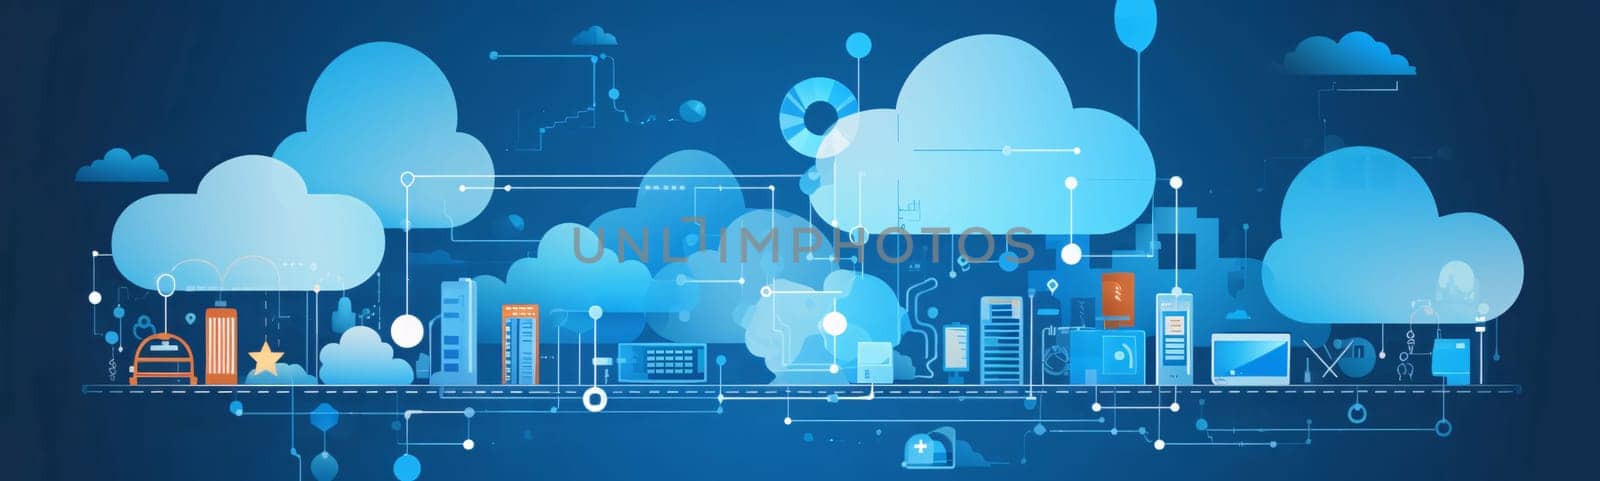 Cloud computing technology concept. Modern vector illustration for web banners, brochures, flyers, presentations and more by ThemesS